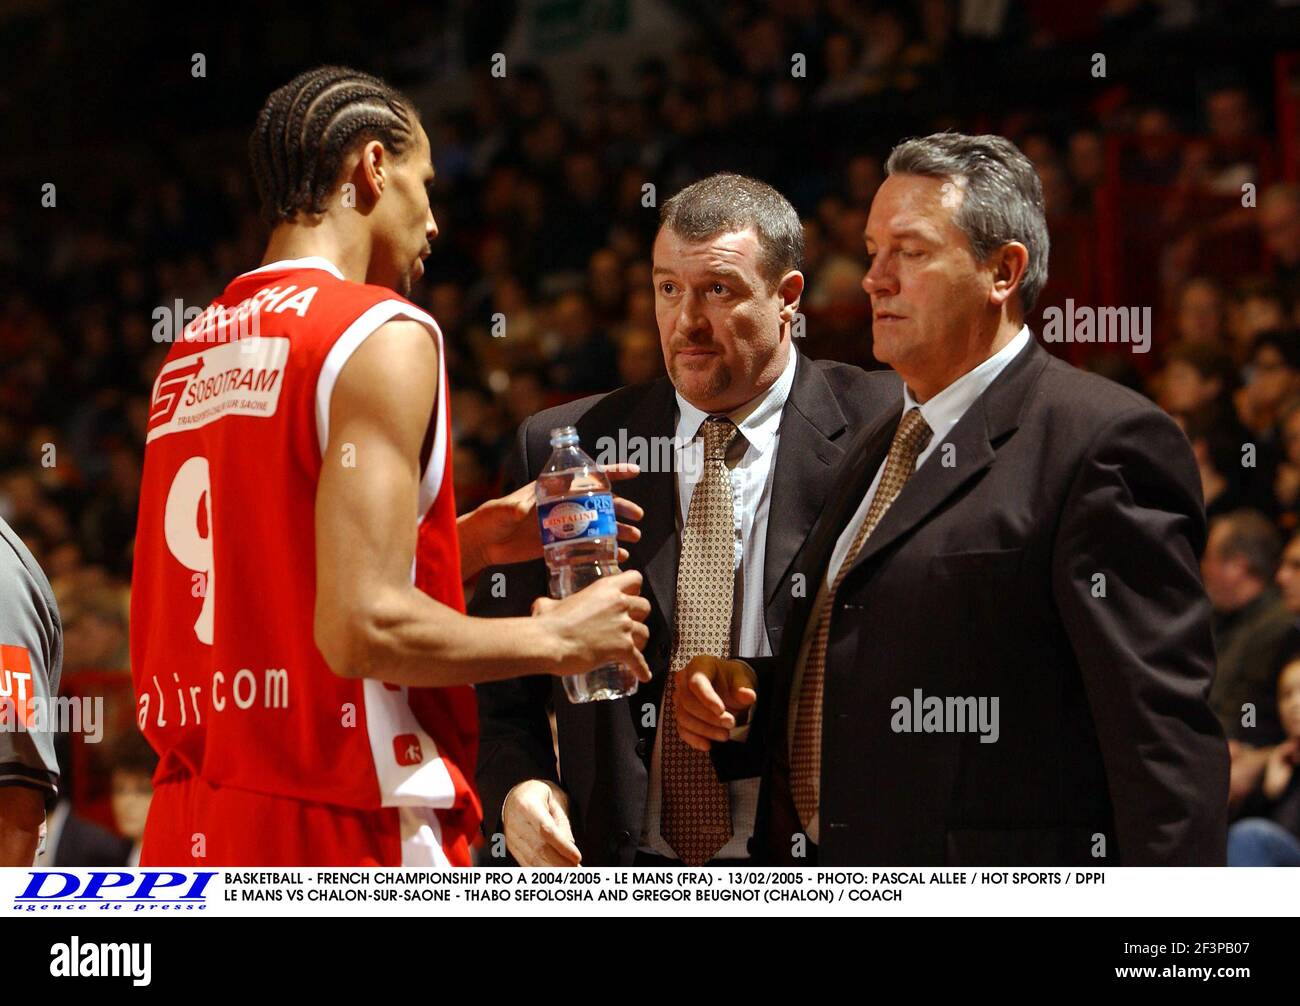 BASKETBALL - FRENCH CHAMPIONSHIP PRO A 2004/2005 - LE MANS (FRA) - 13/02/2005 - PHOTO: PASCAL ALLEE / HOT SPORTS / DPPI LE MANS VS CHALON-SUR-SAONE - THABO SEFOLOSHA AND GREGOR BEUGNOT (CHALON) / COACH Stock Photo